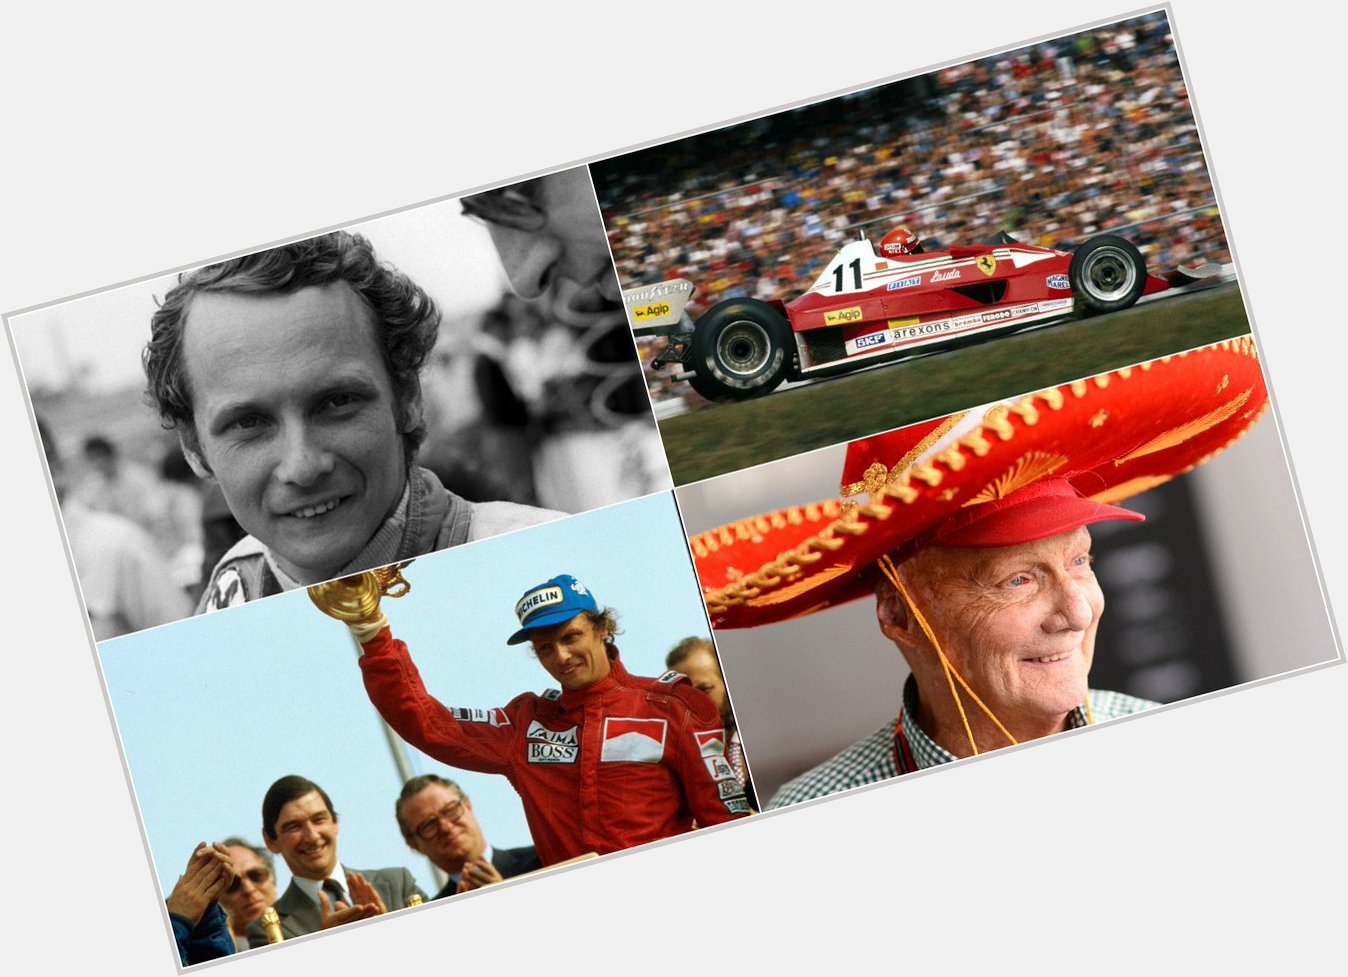 A true icon of was born in 1949  Happy 68th Birthday to the great Niki Lauda  